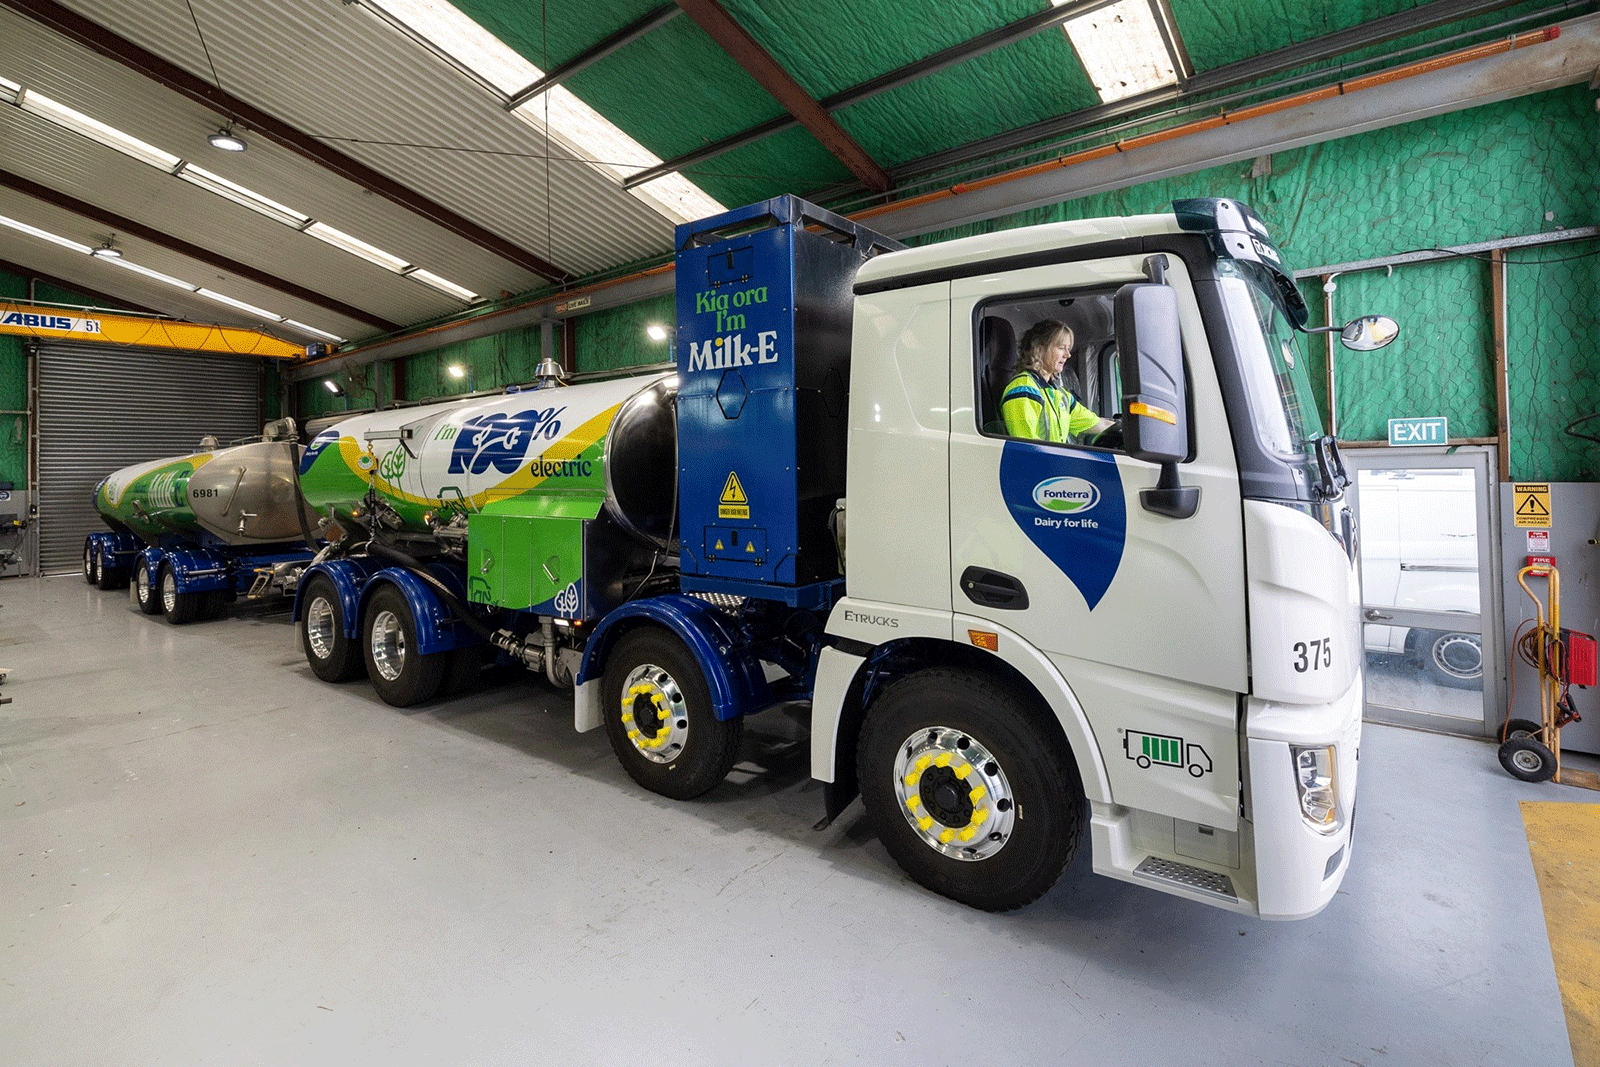 “Milk-e” is New Zealand’s (and possibly the world’s) first electric milk tanker. 